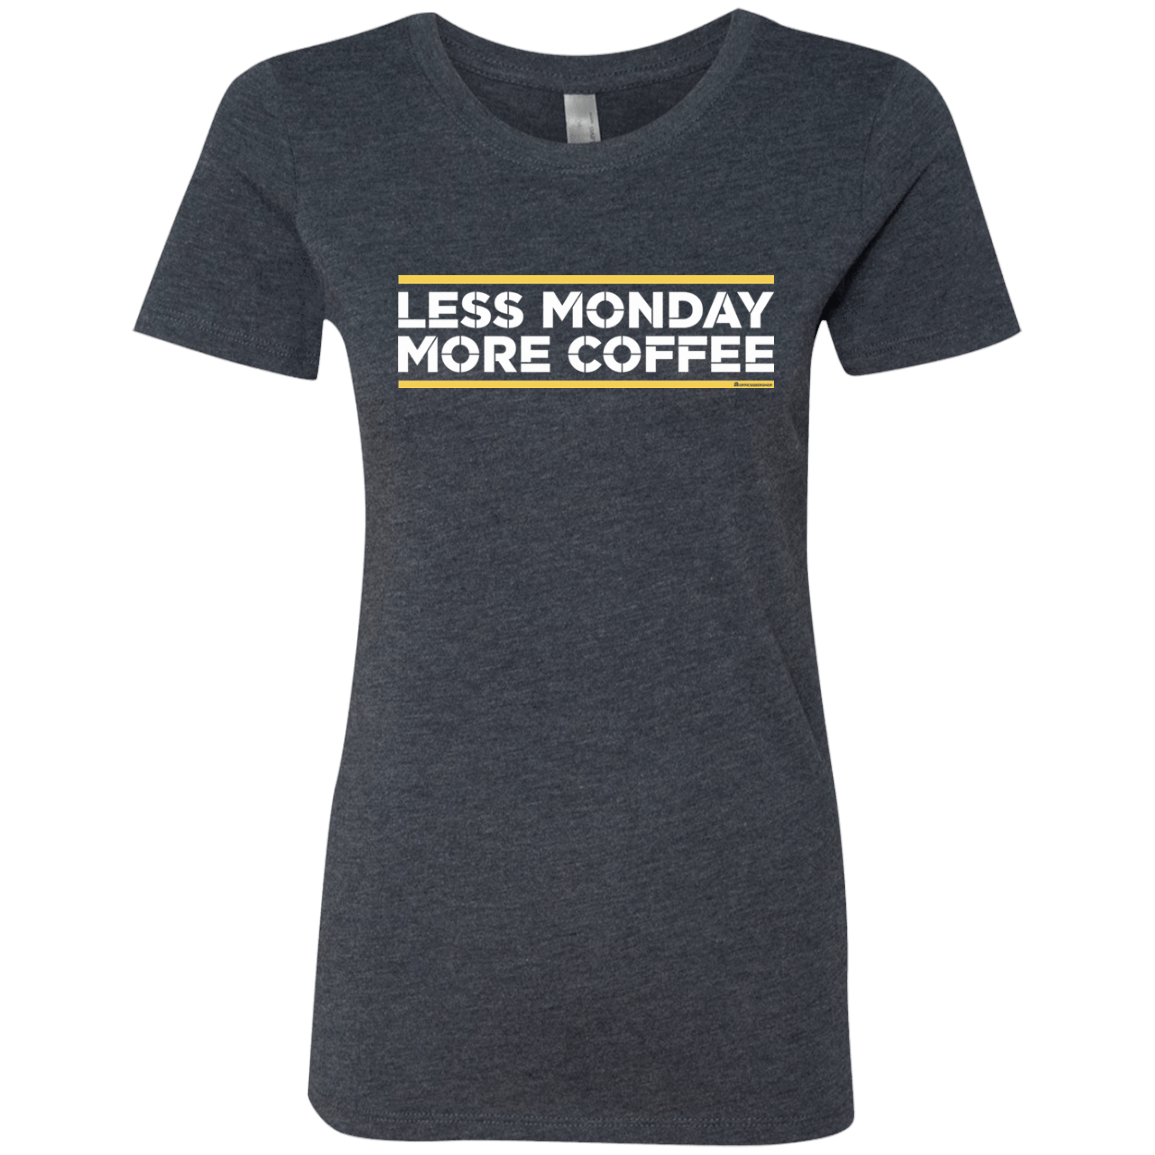 T-Shirts Vintage Navy / Small Less Monday More Coffee Women's Triblend T-Shirt